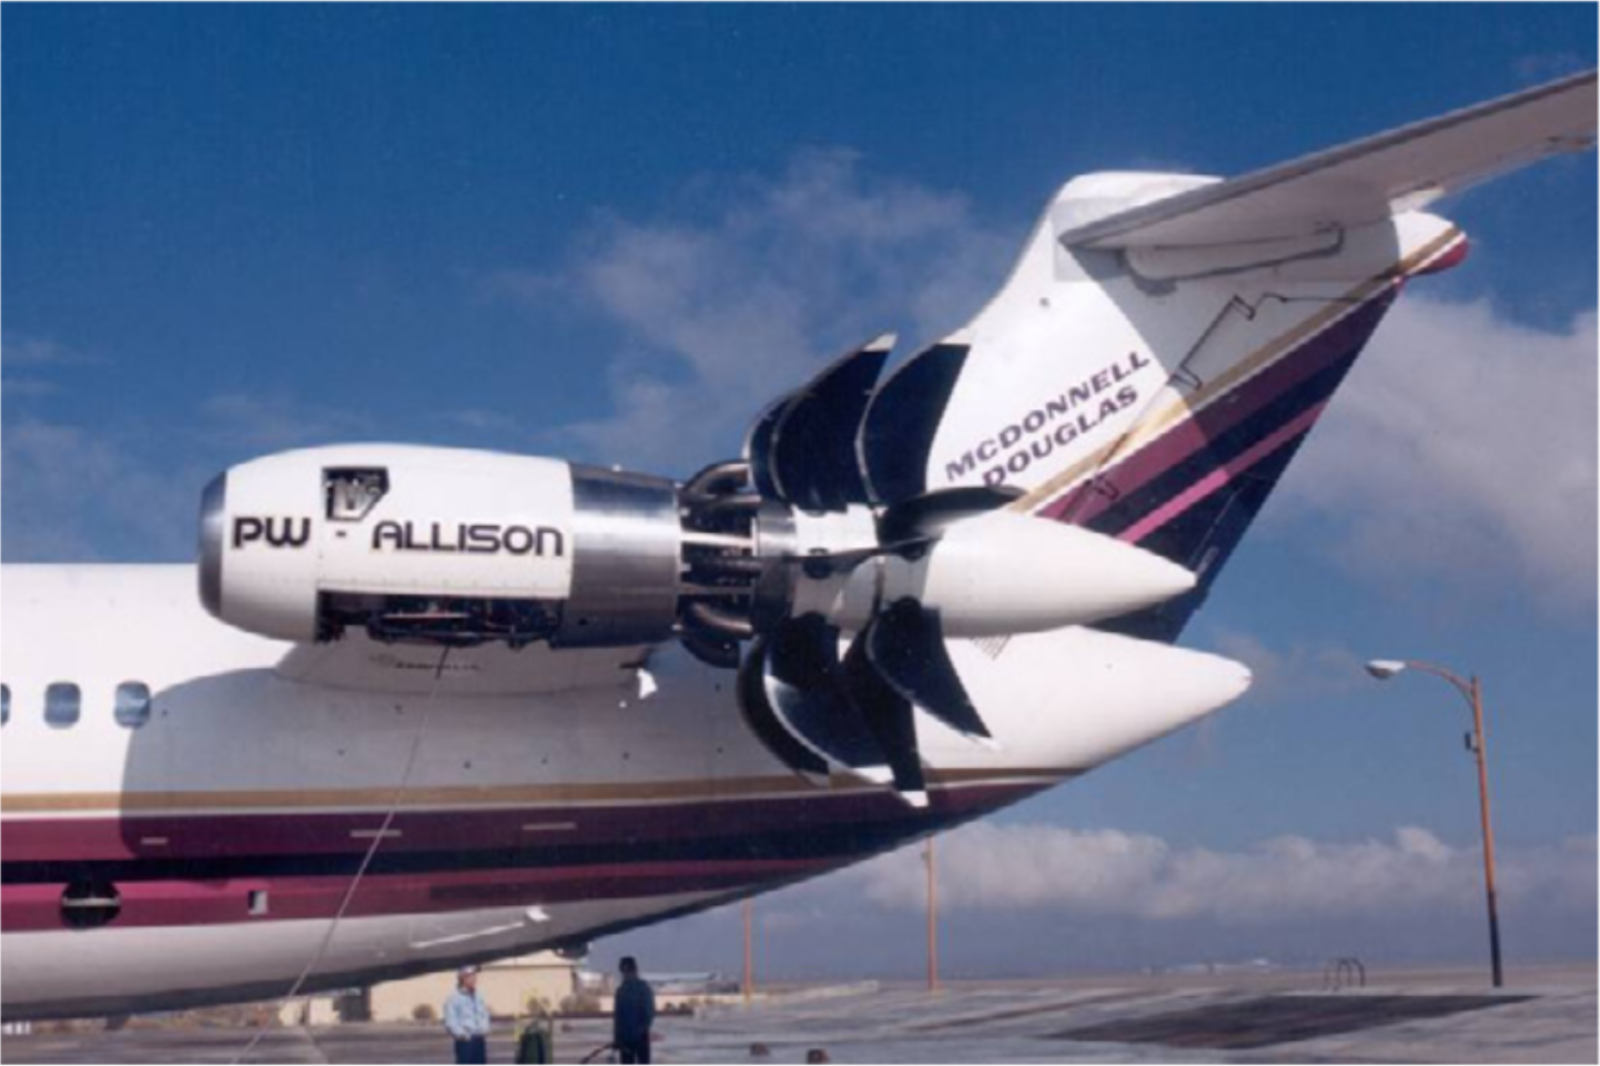 The Pratt &amp; Whitney-Allison 578–DX geared propfan demonstrator engine, installed on an MD-80 testbed aircraft.